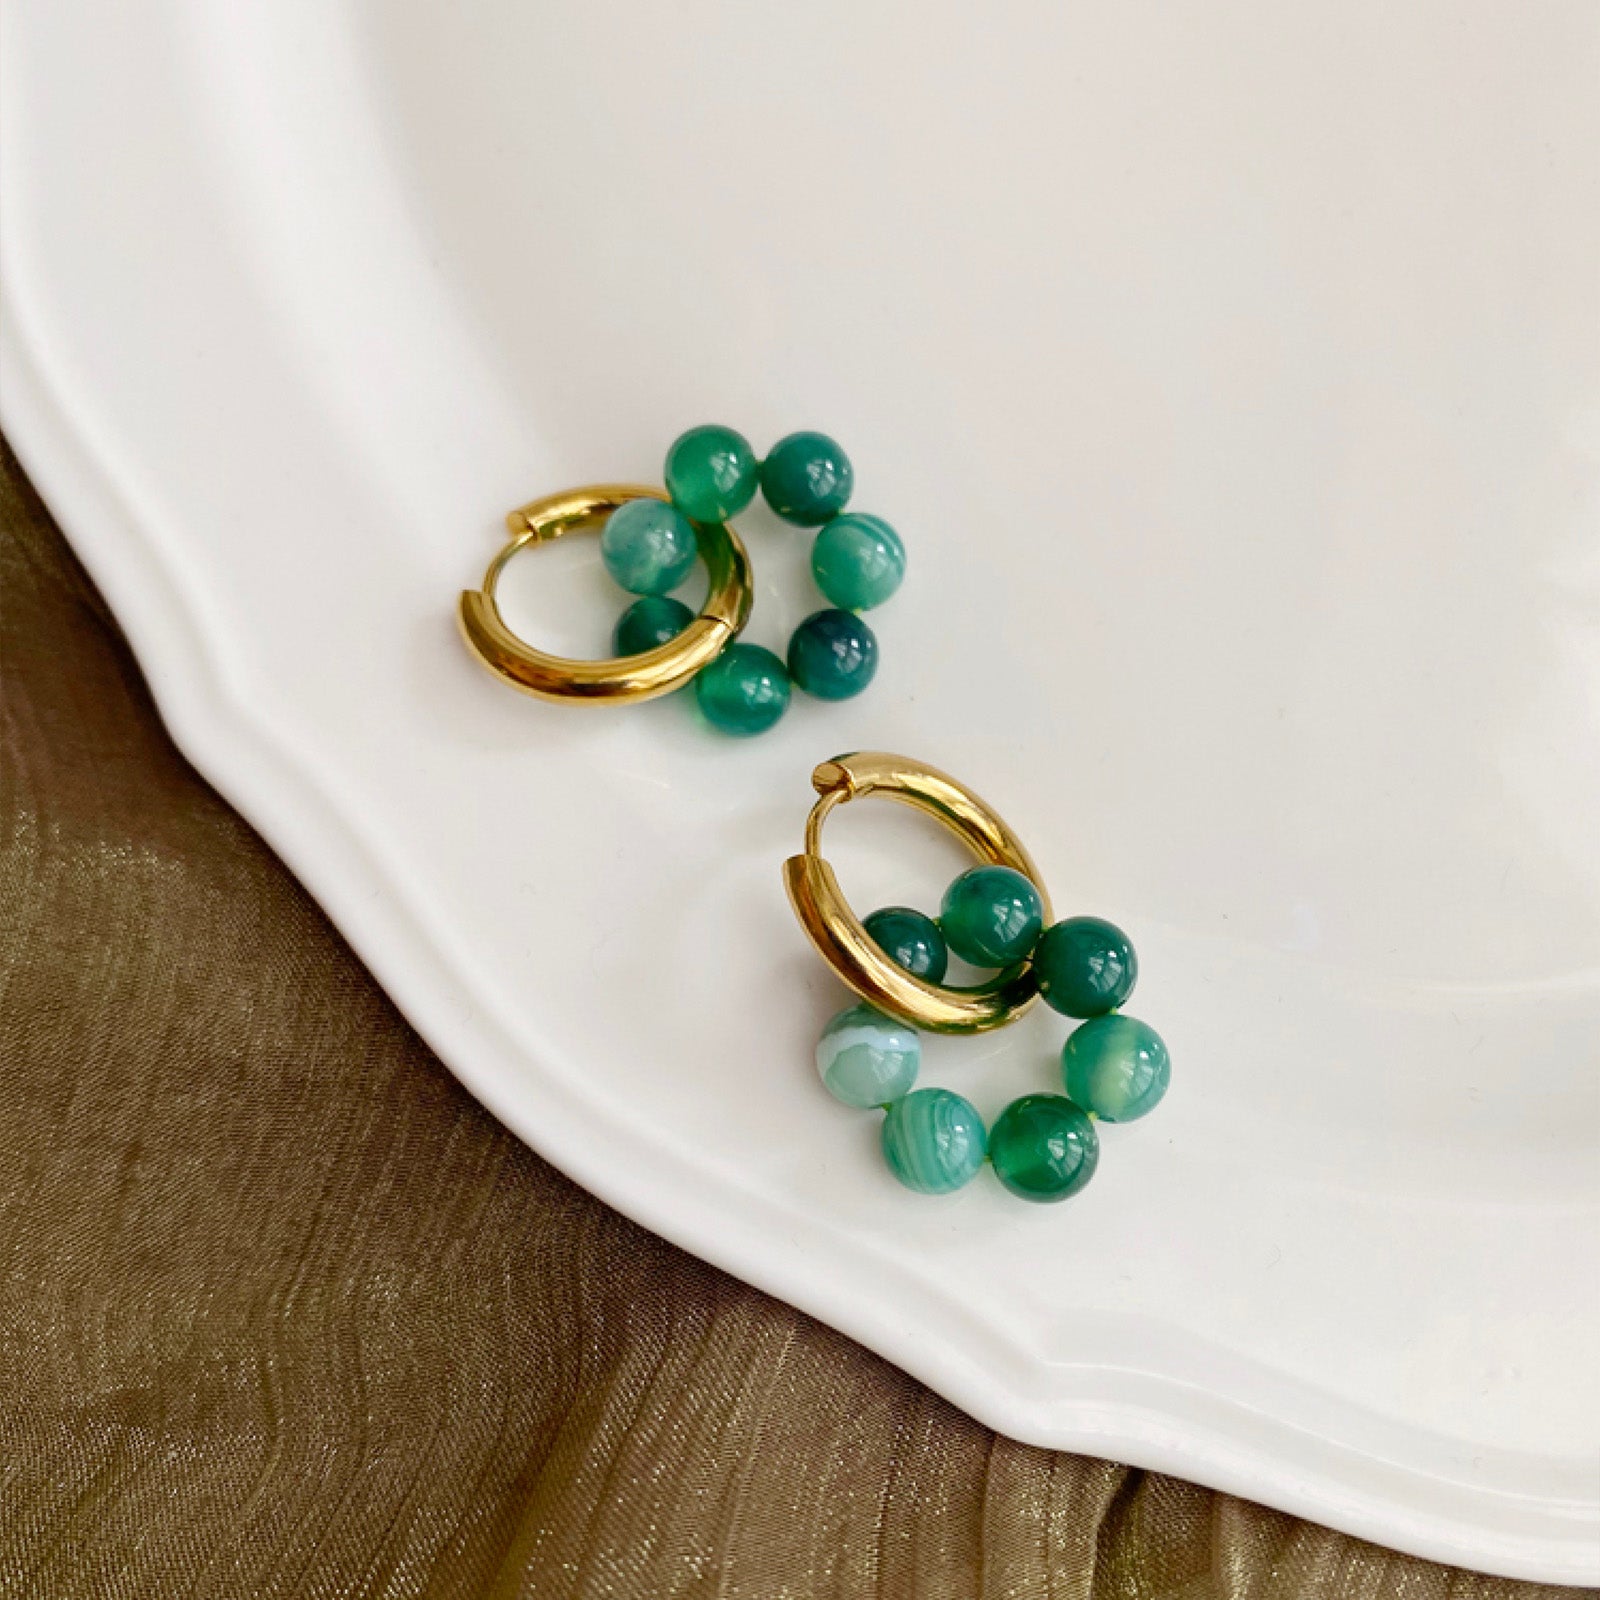 Medium Hoop Earrings with Agate Accents, creating a whirlwind of style with agate stones, these medium-sized hoops make a bold and fashionable statement